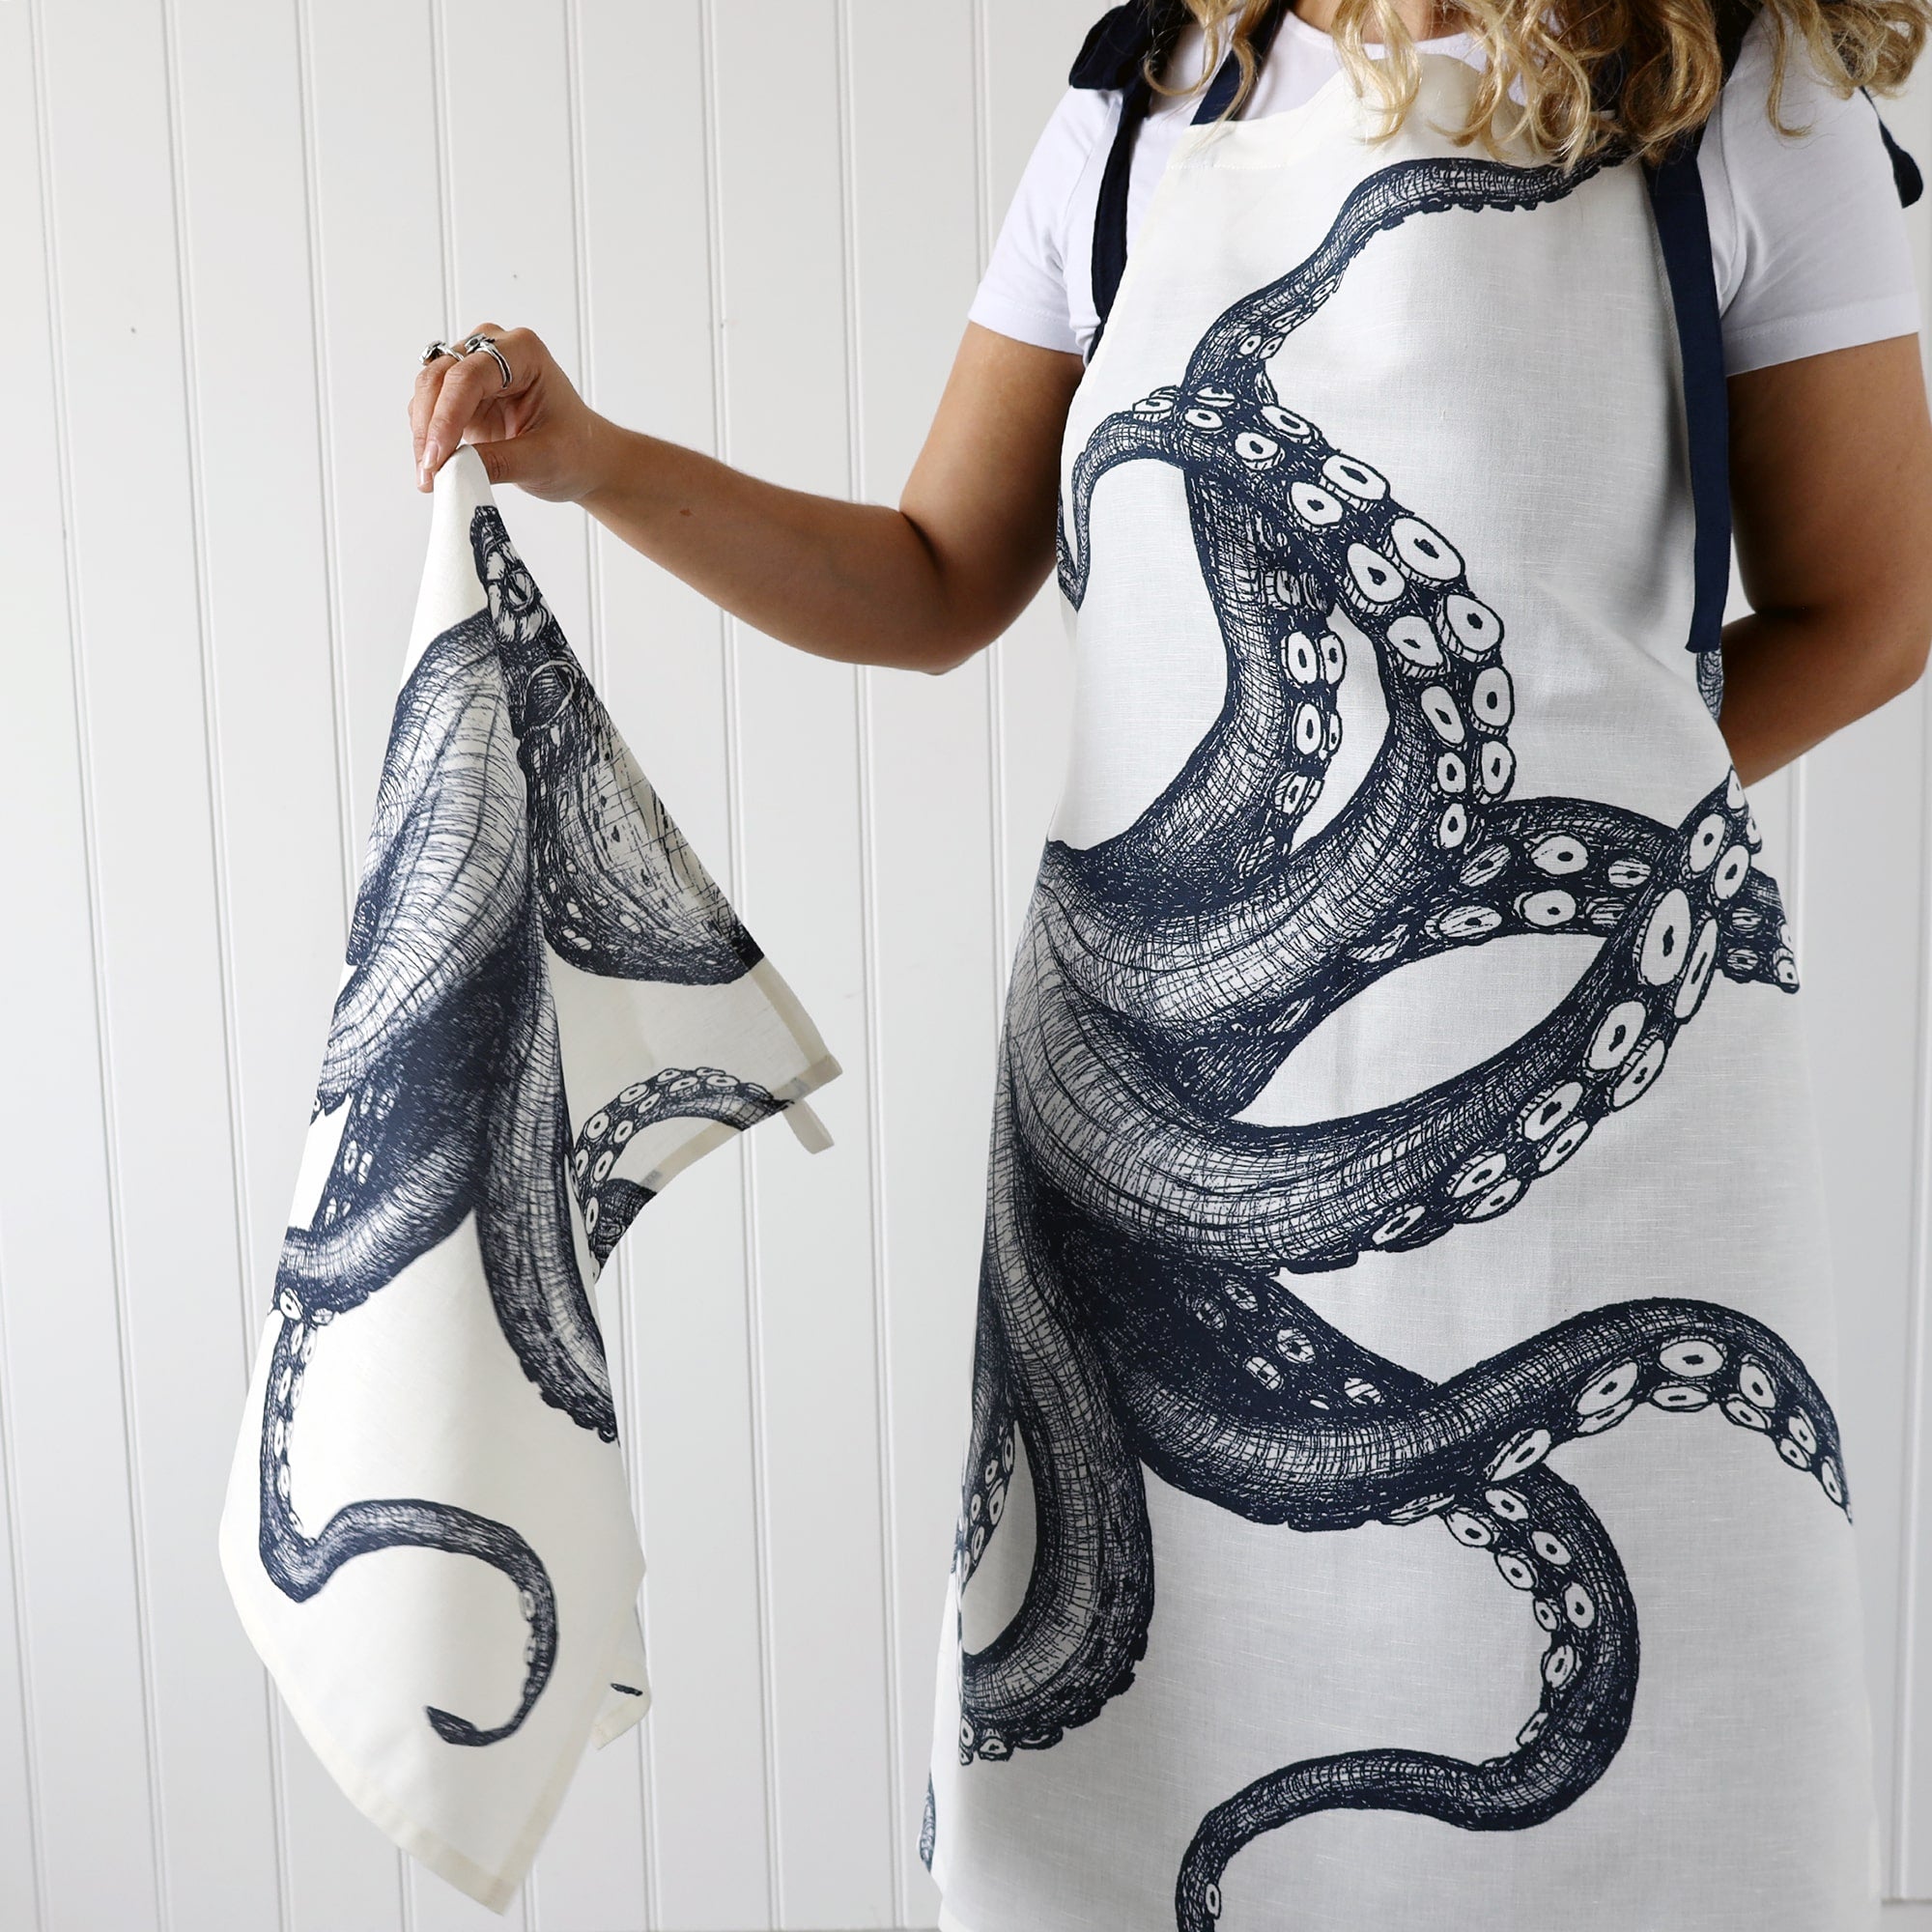 Our octopus apron being worn by a model who is also holding an octopus tea towel